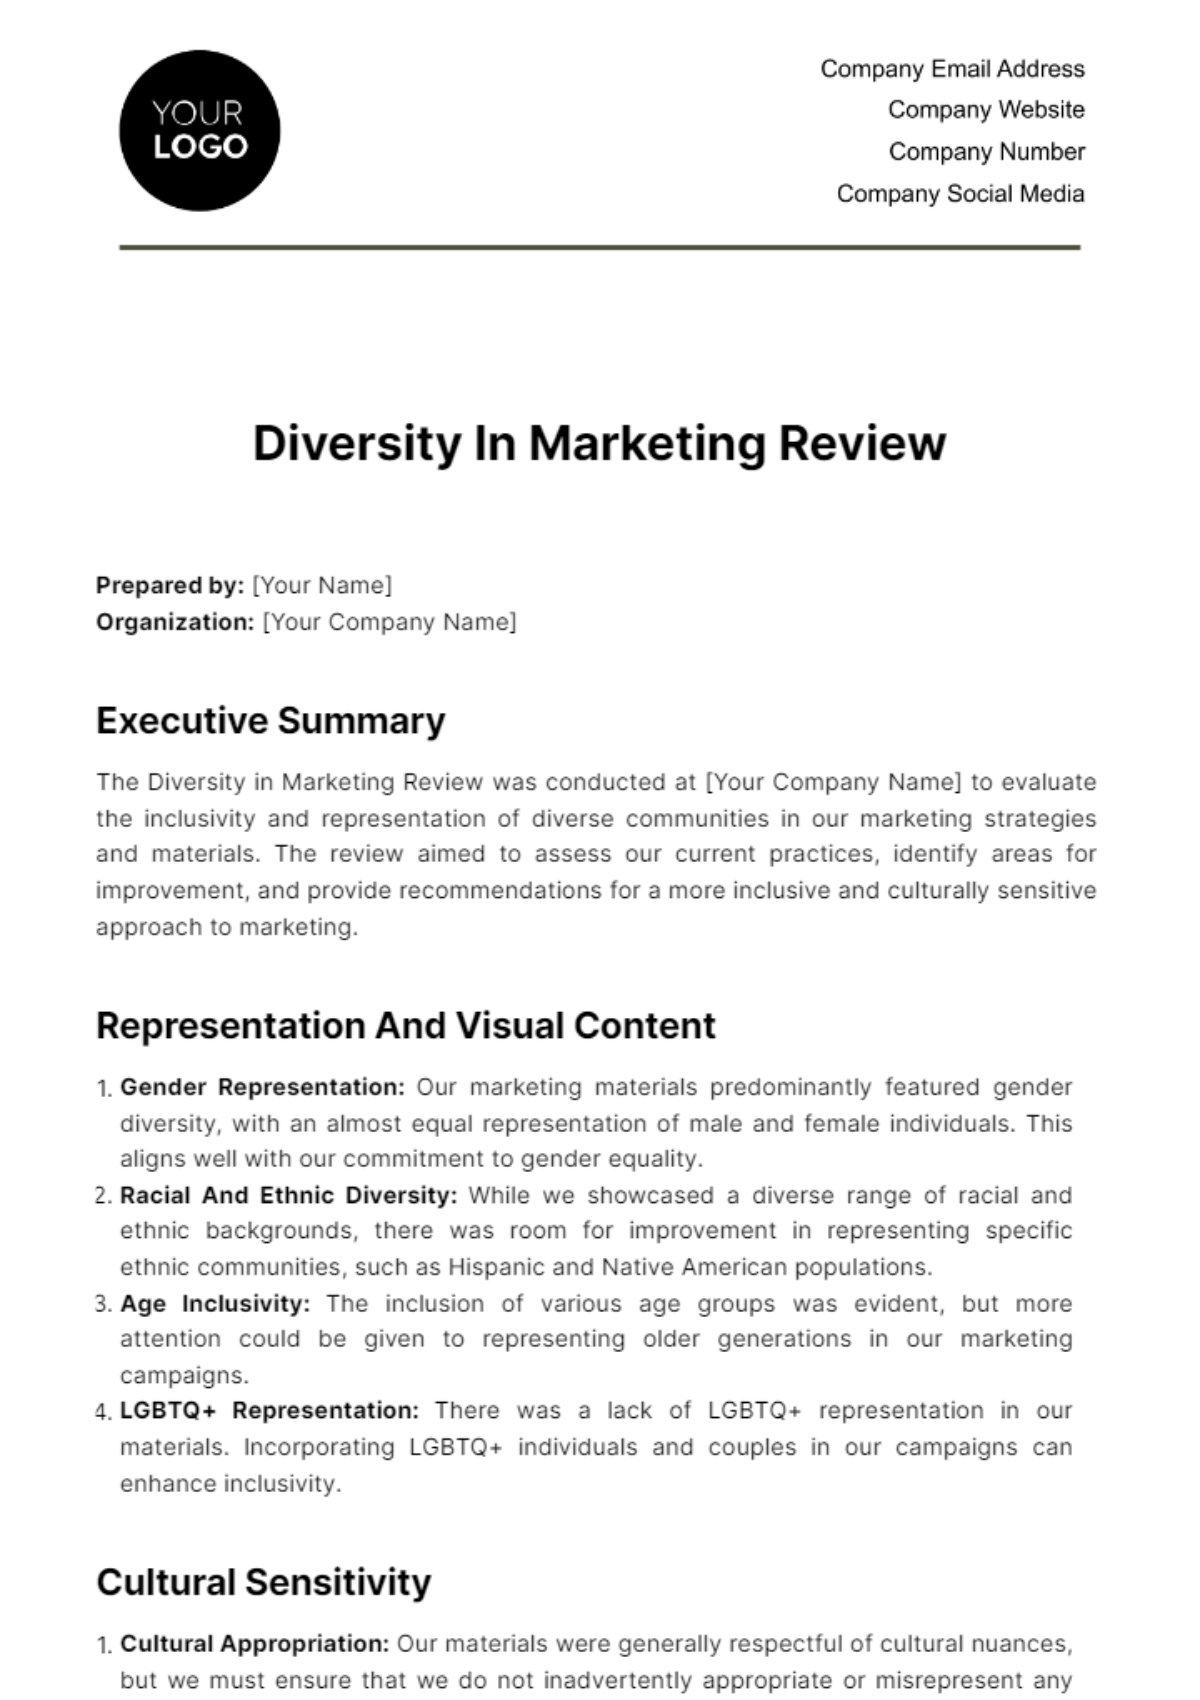 Diversity in Marketing Review HR Template